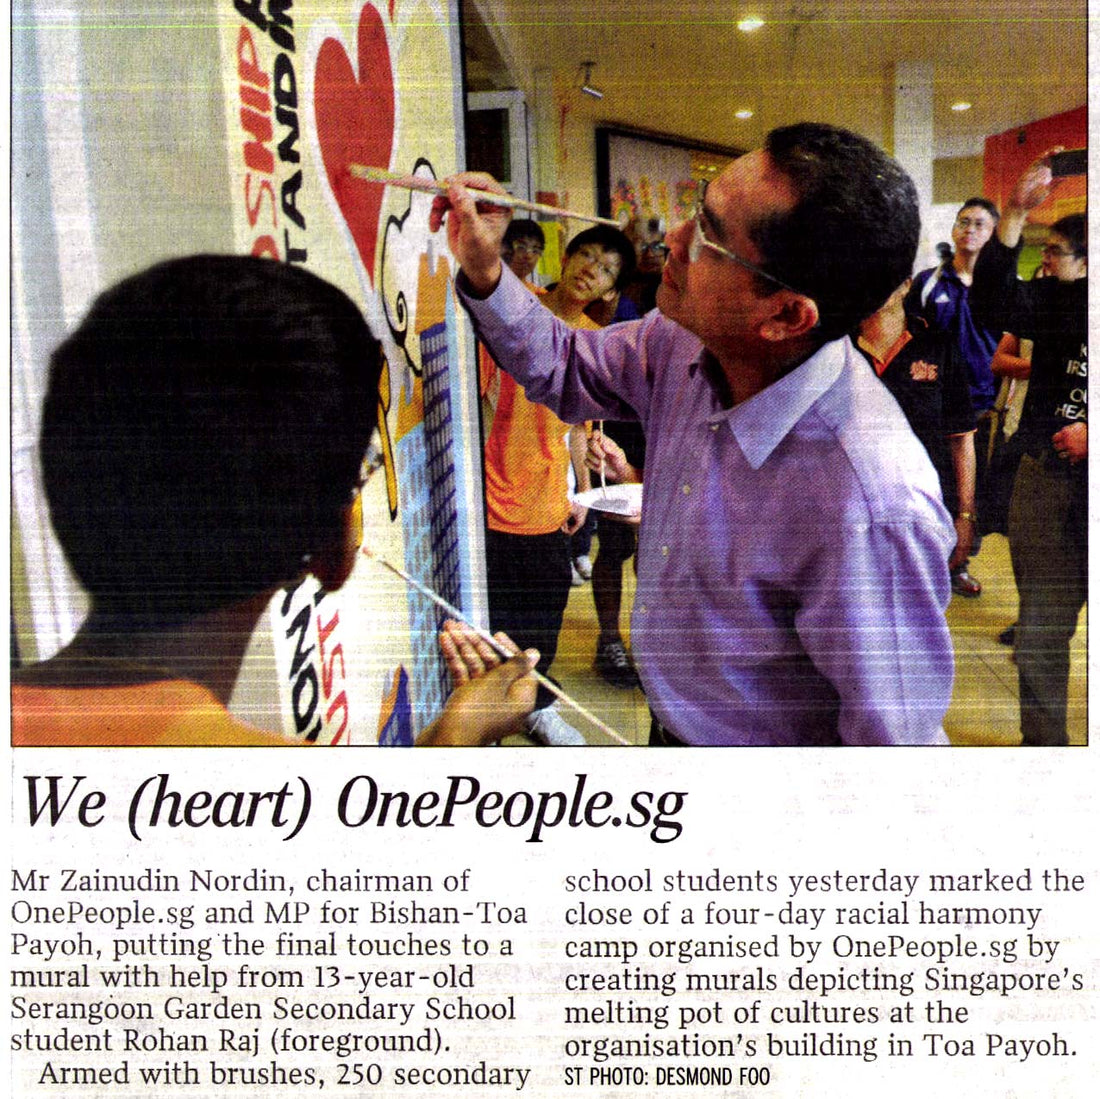 WE (HEART) ONEPEOPLE.SG